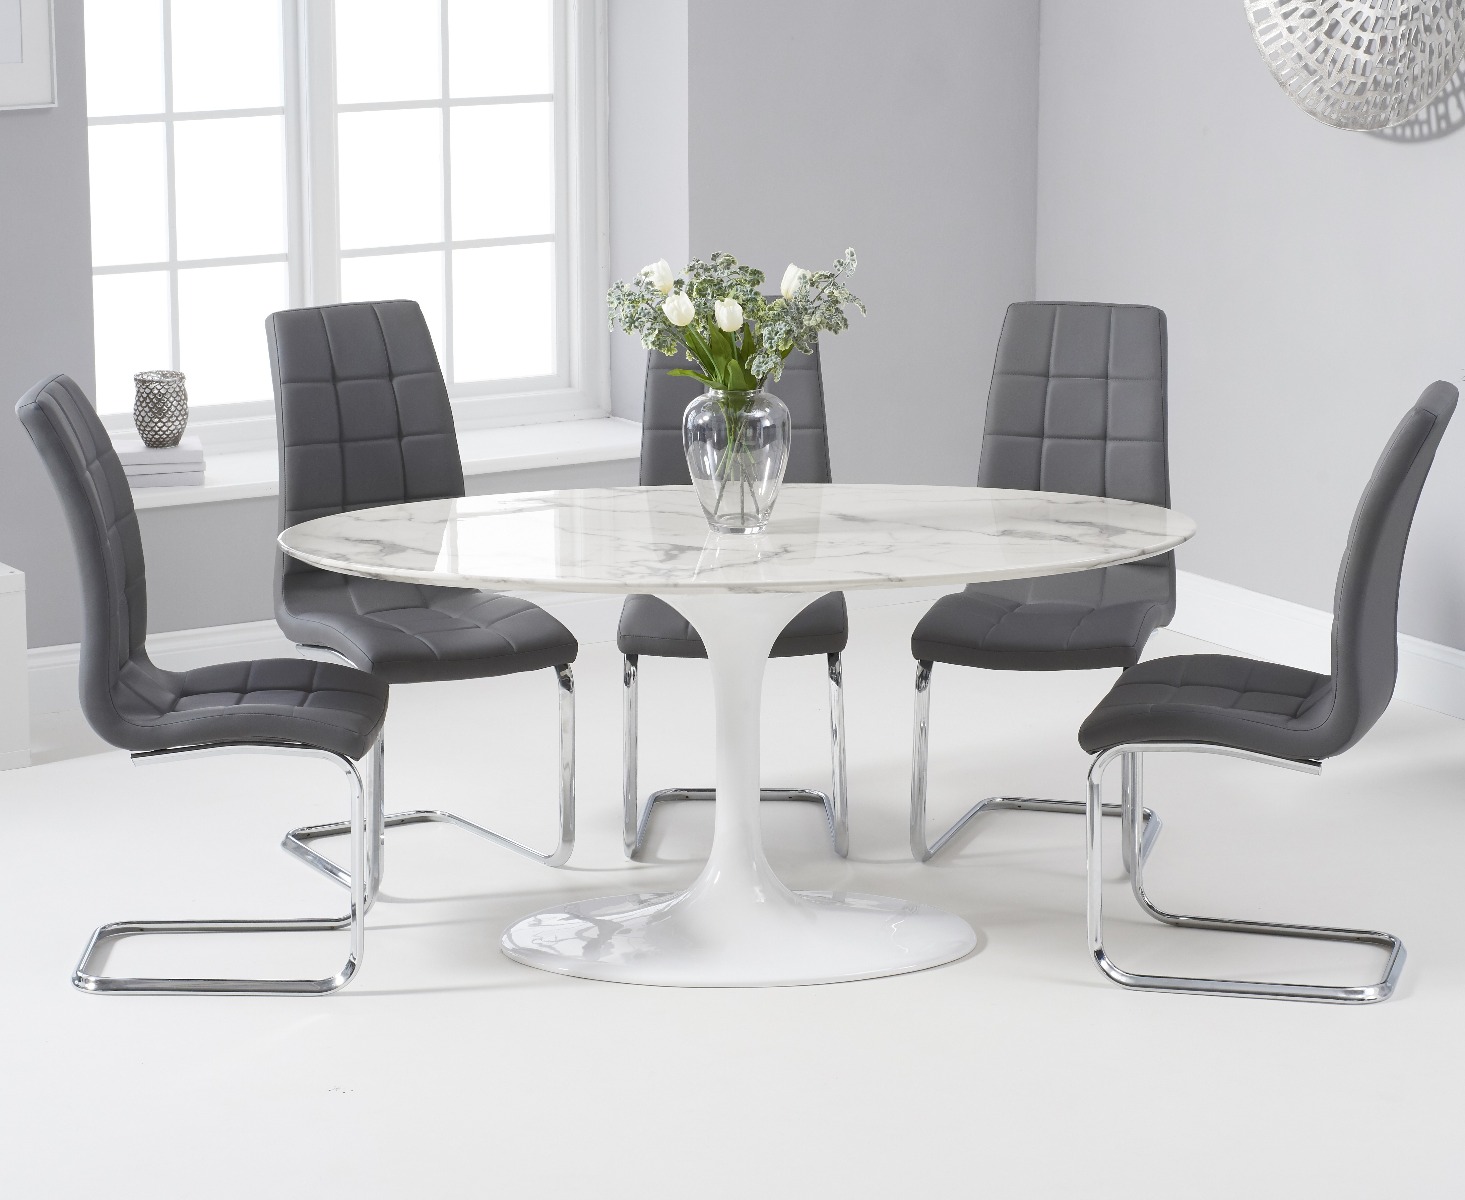 Brighton 160cm Oval White Marble Dining Table With 4 Grey Vigo Dining Chairs